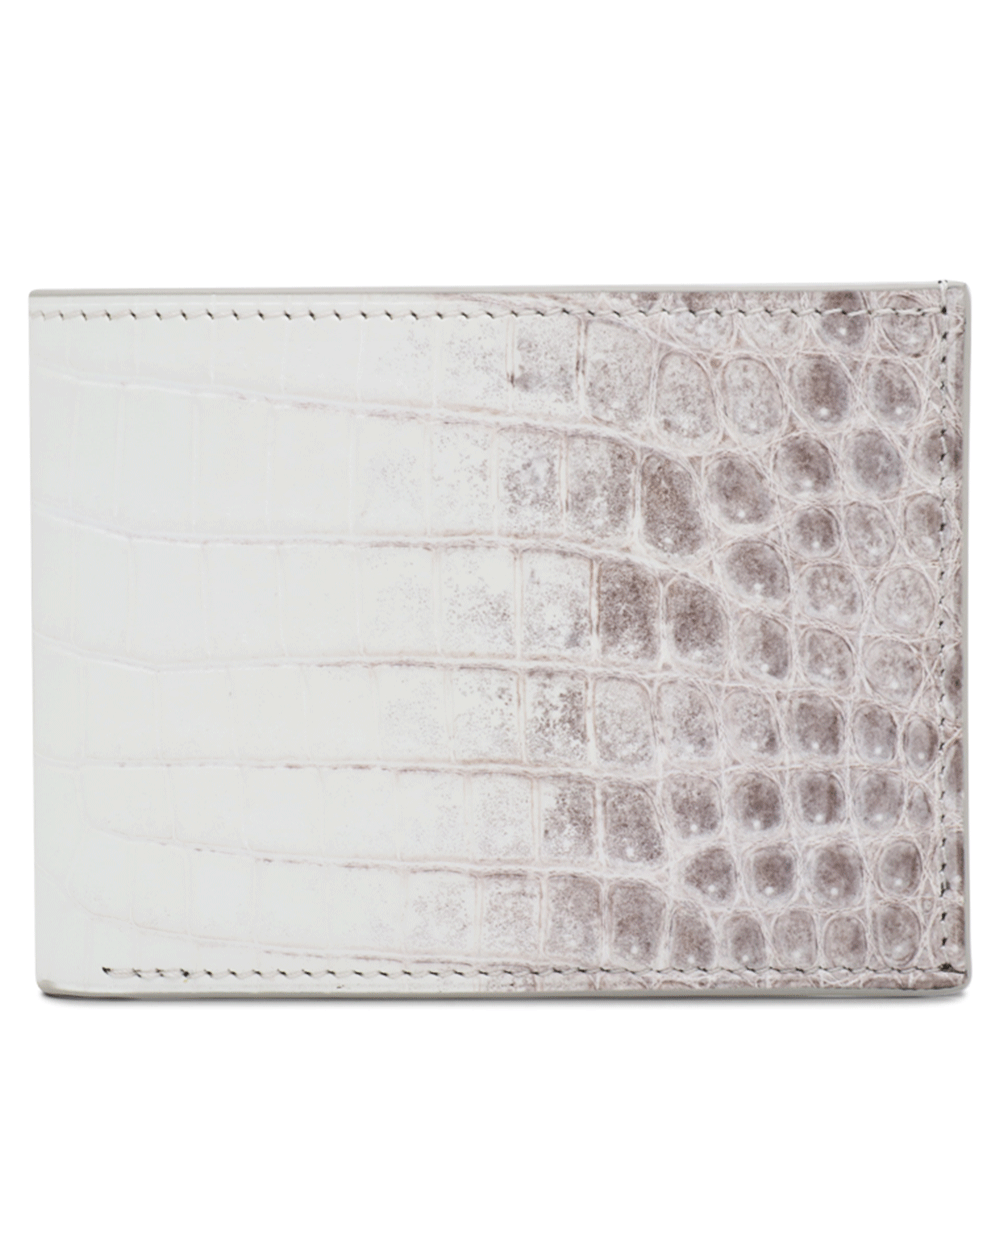 Deluxe Himalayan Bifold Wallet in White Snow Cap